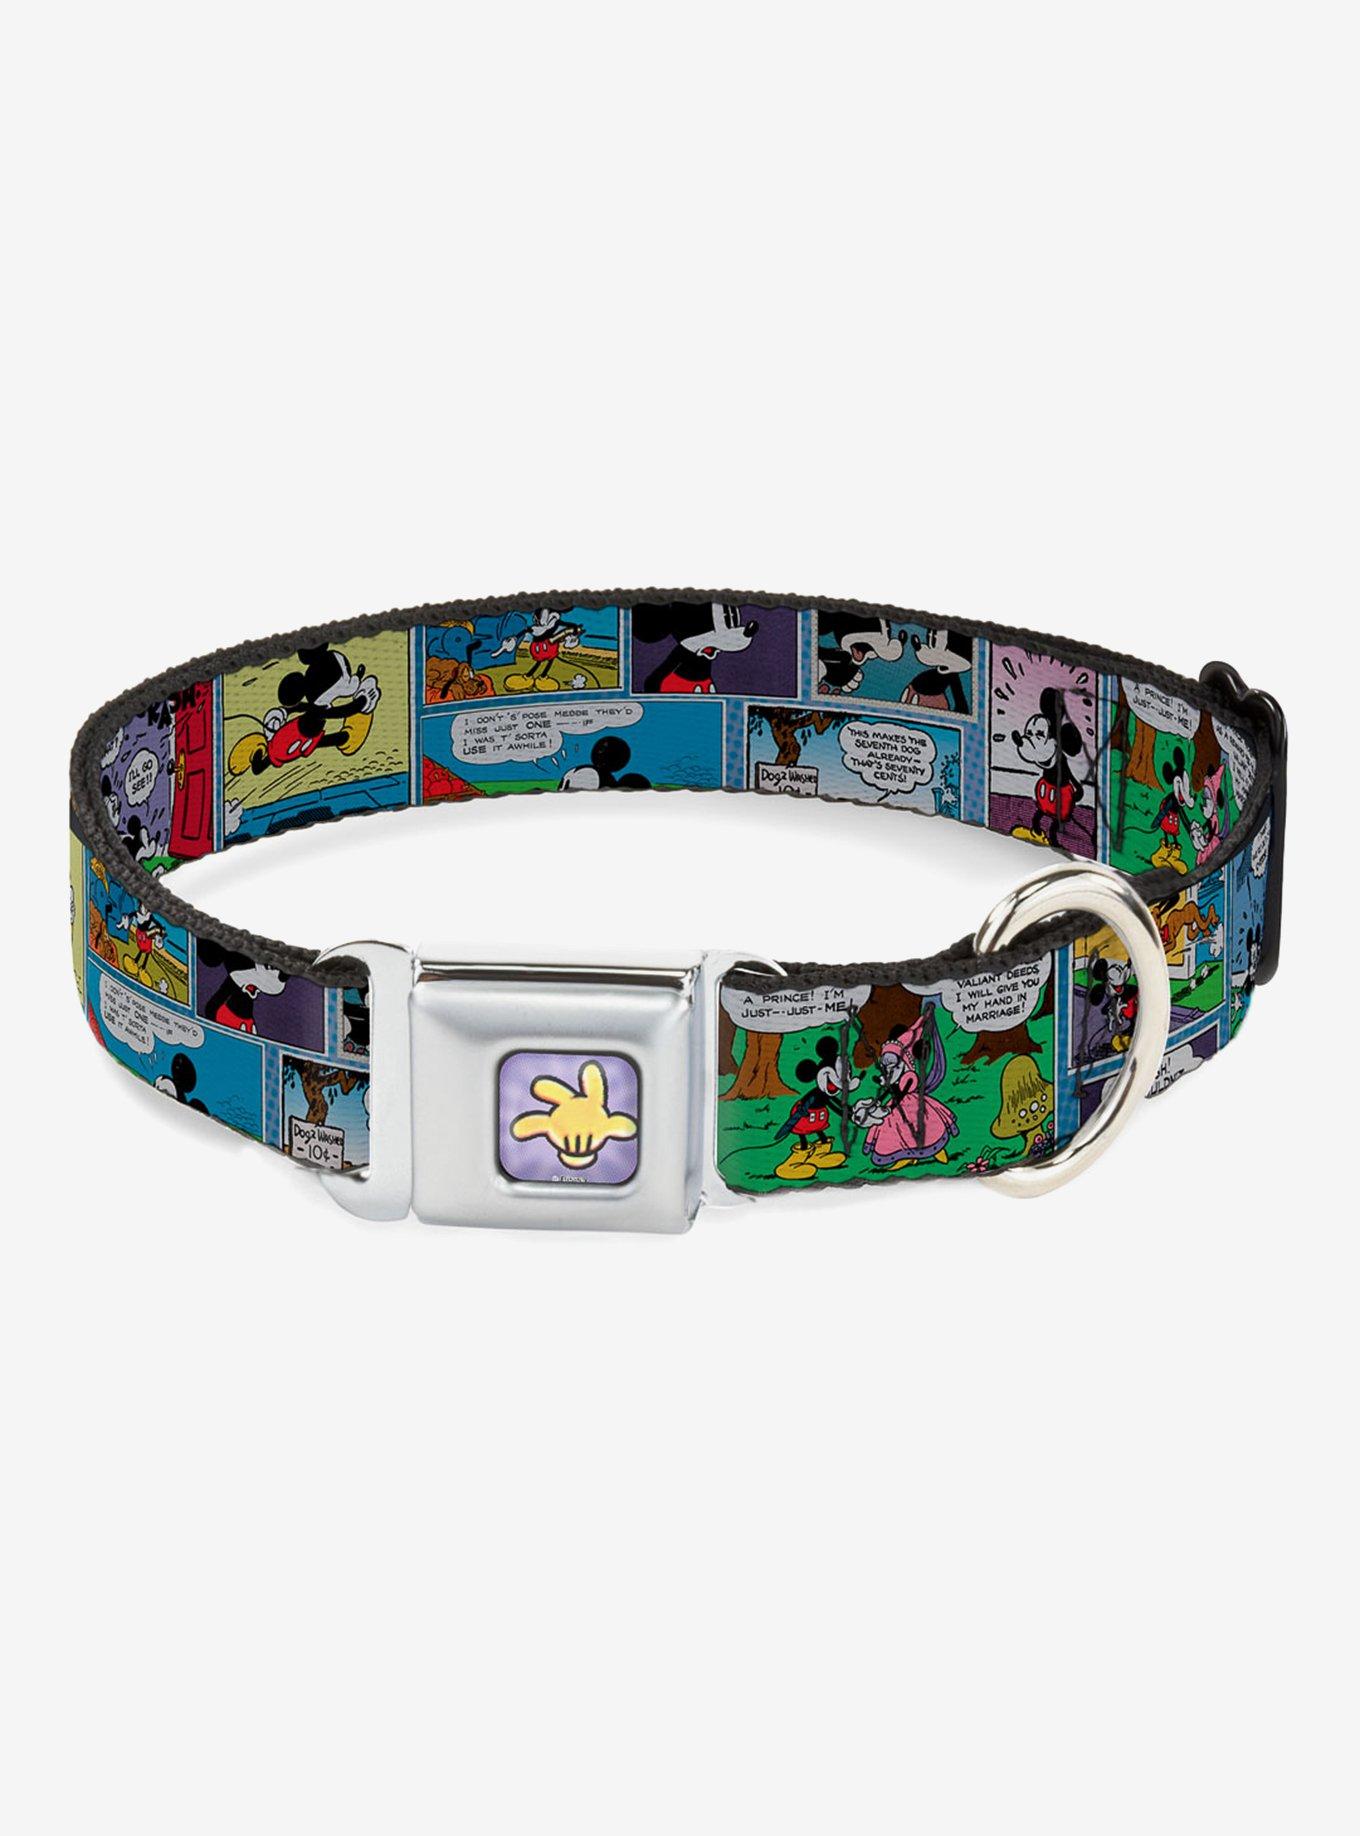 Disney Mickey Mouse And Minnie Comic Strip Seatbelt Buckle Dog Collar, MULTICOLOR, hi-res